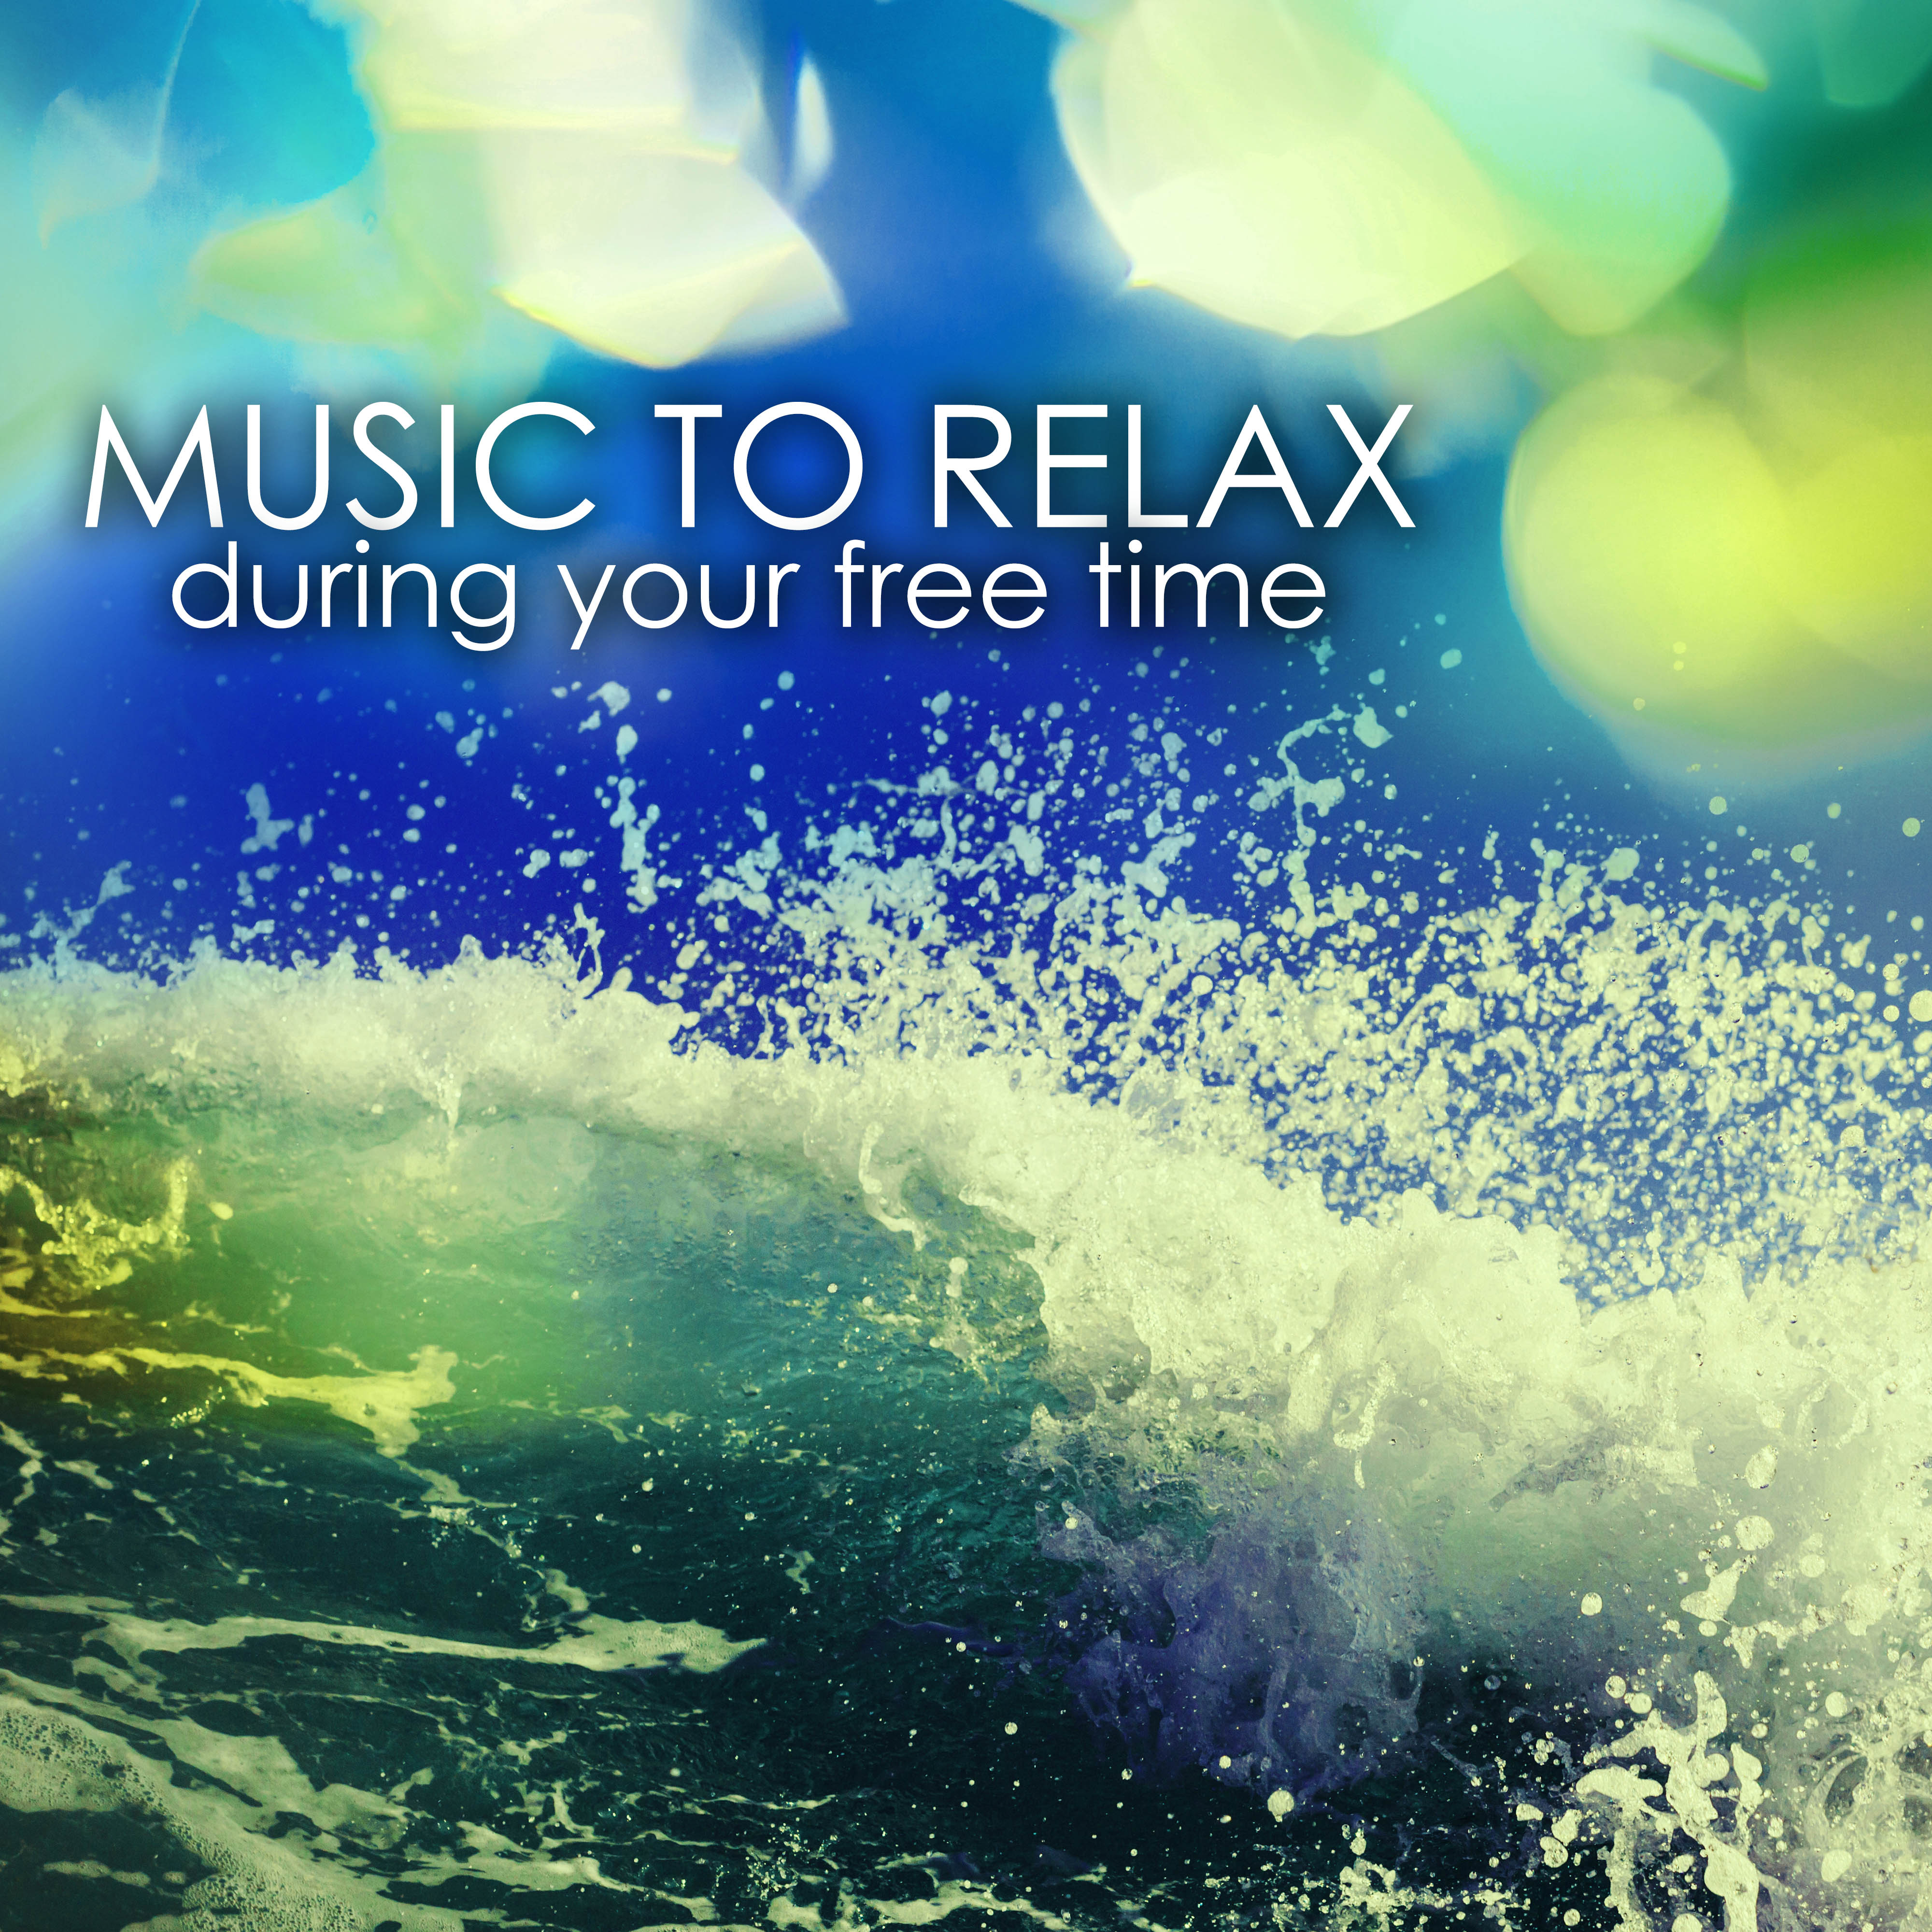 Music to Relax During Your Free Time - Fall in a Deep State of Relaxation